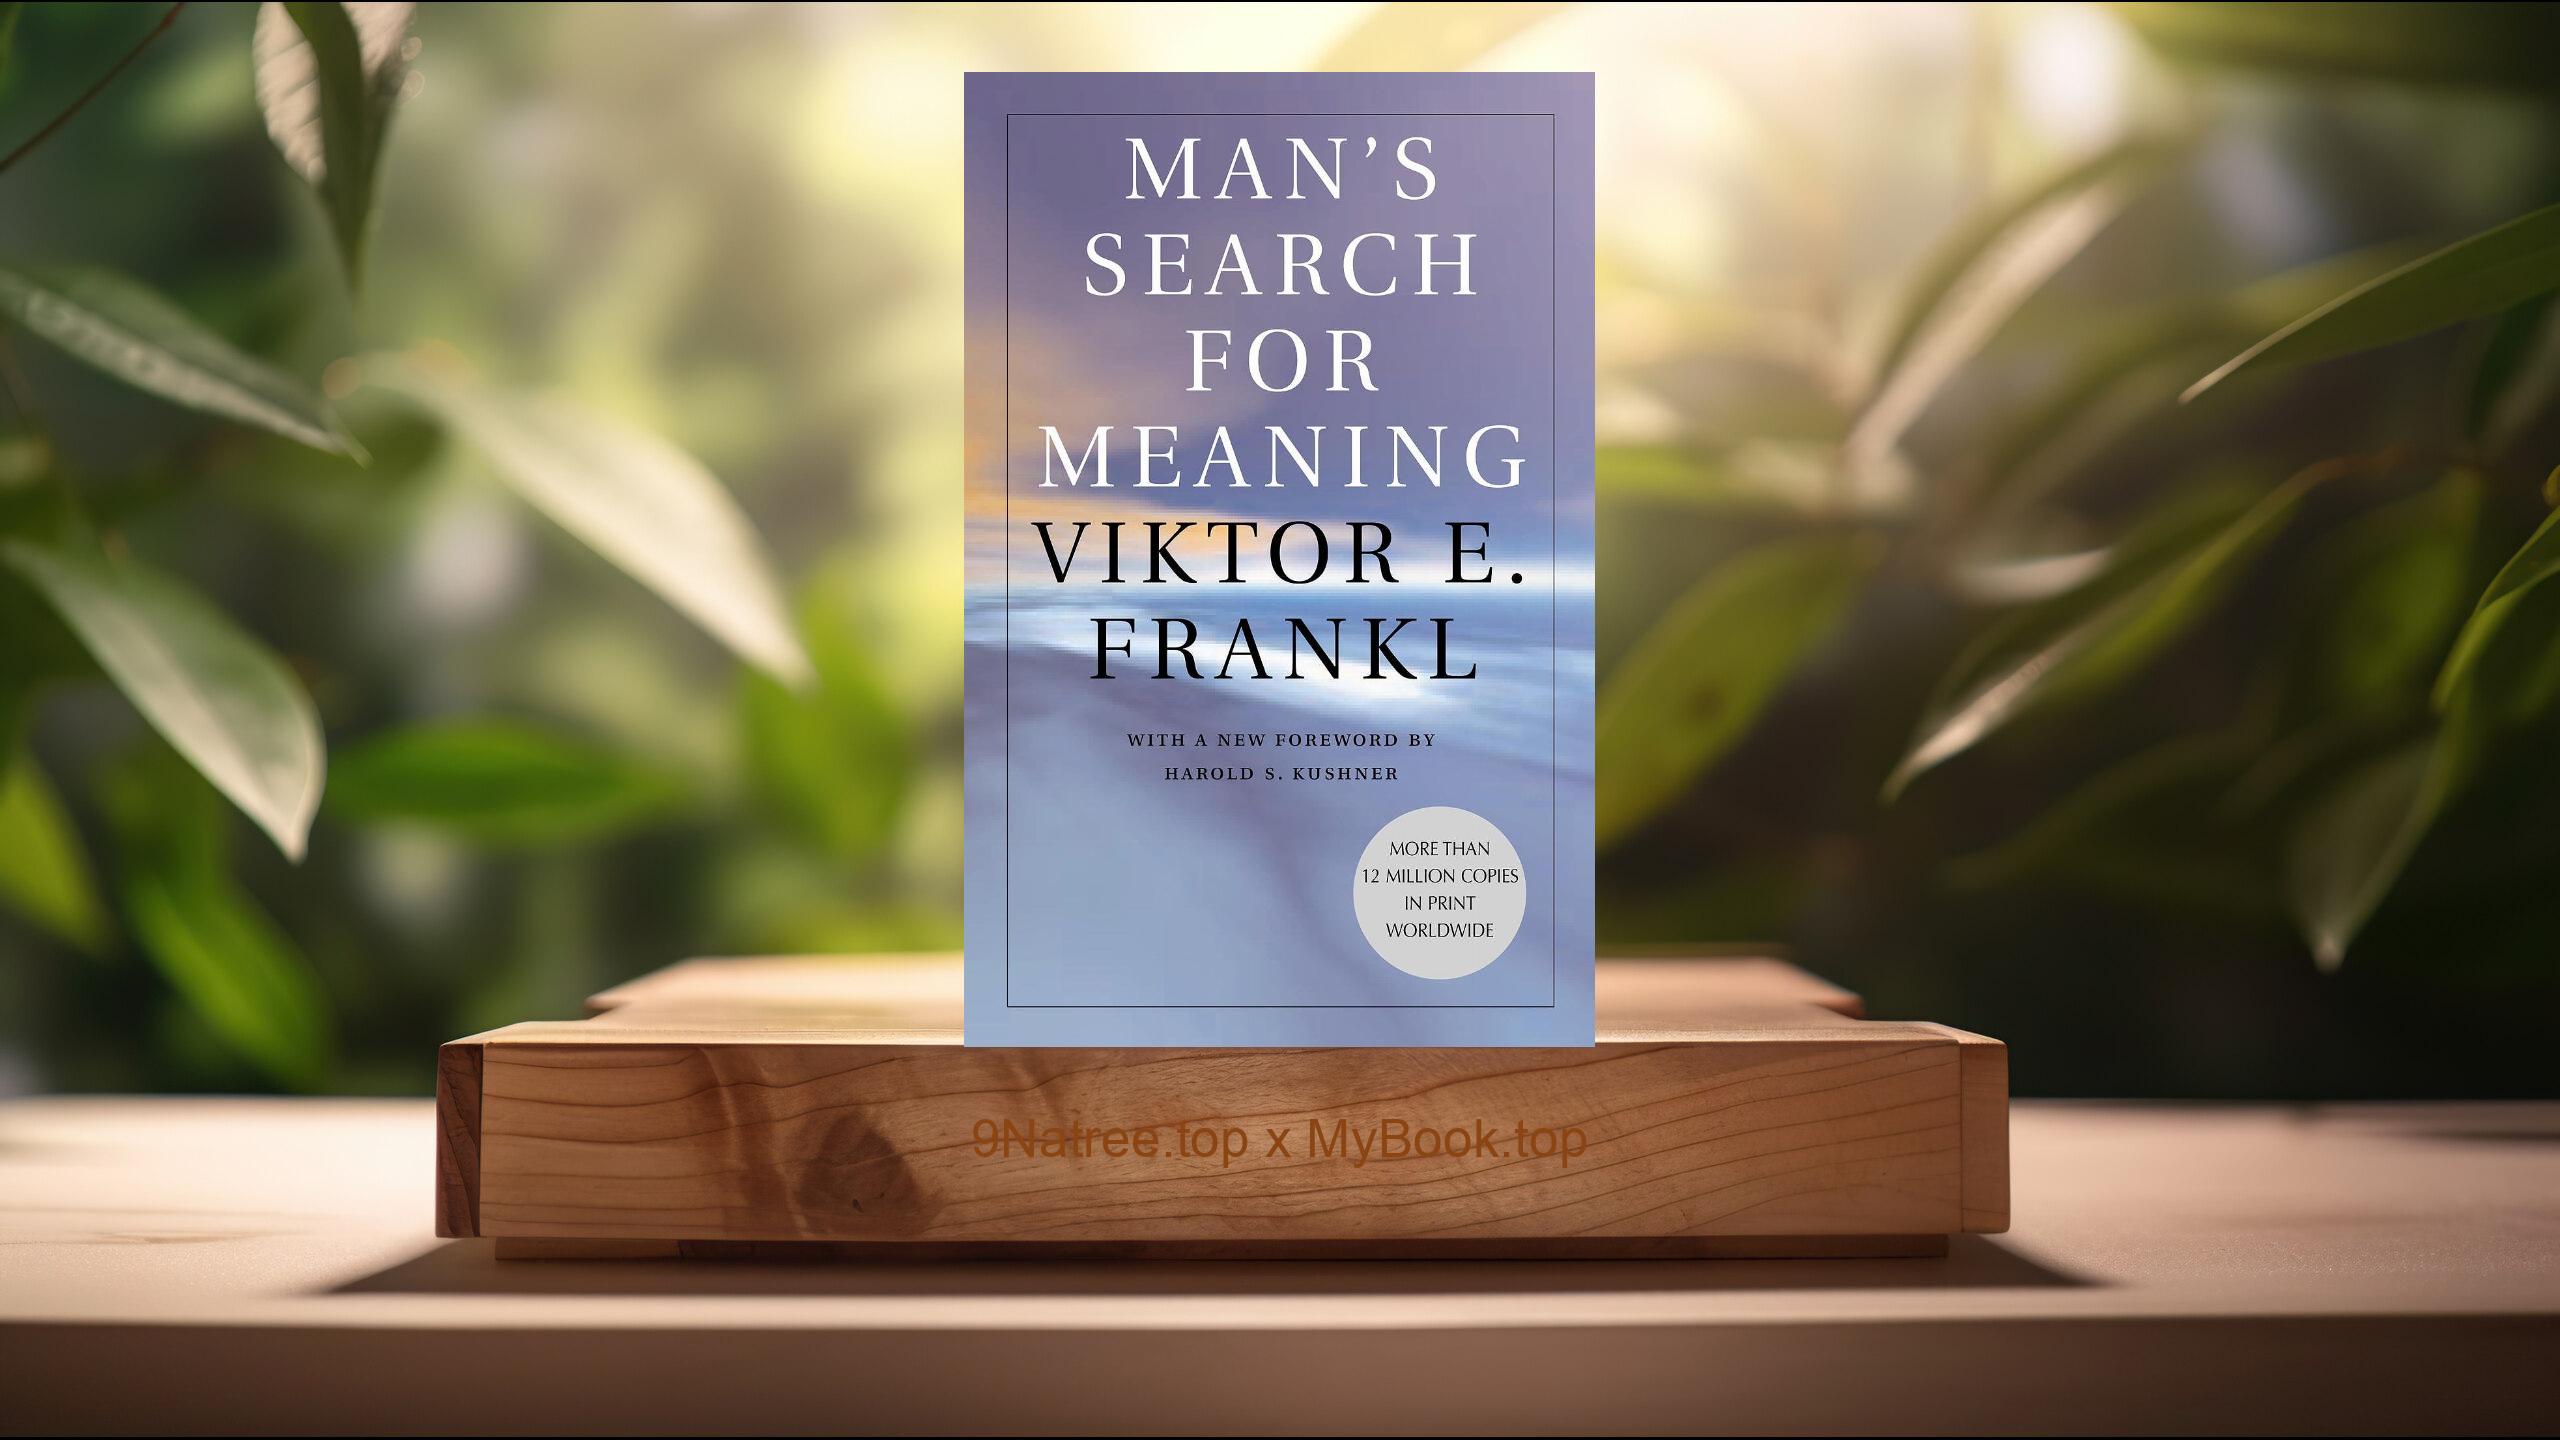 [Review] Man's Search for Meaning (Viktor E. Frankl) Summarized